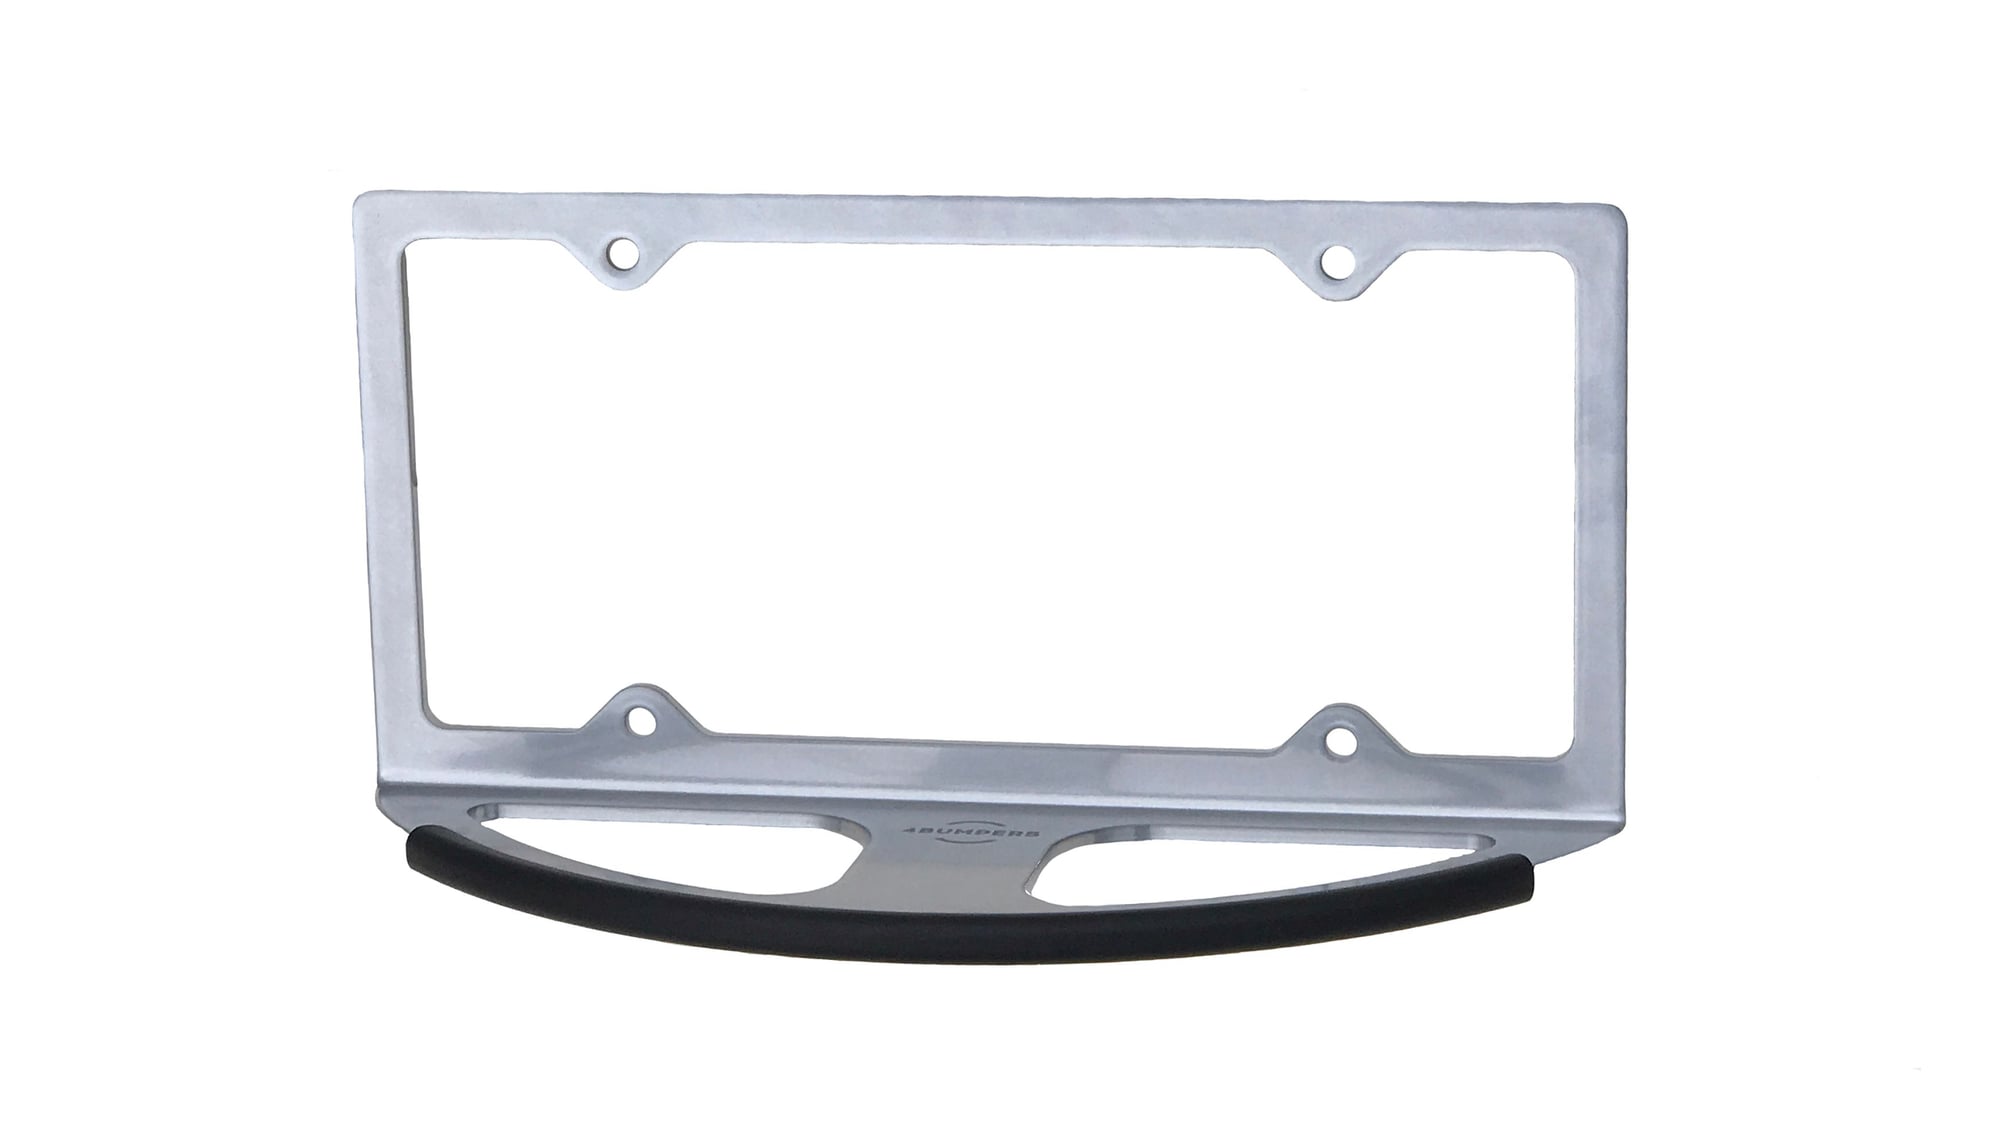 Accessories - BEST solid steel license plate frame parking bumper protector - New - Nyc, NY 10023, United States